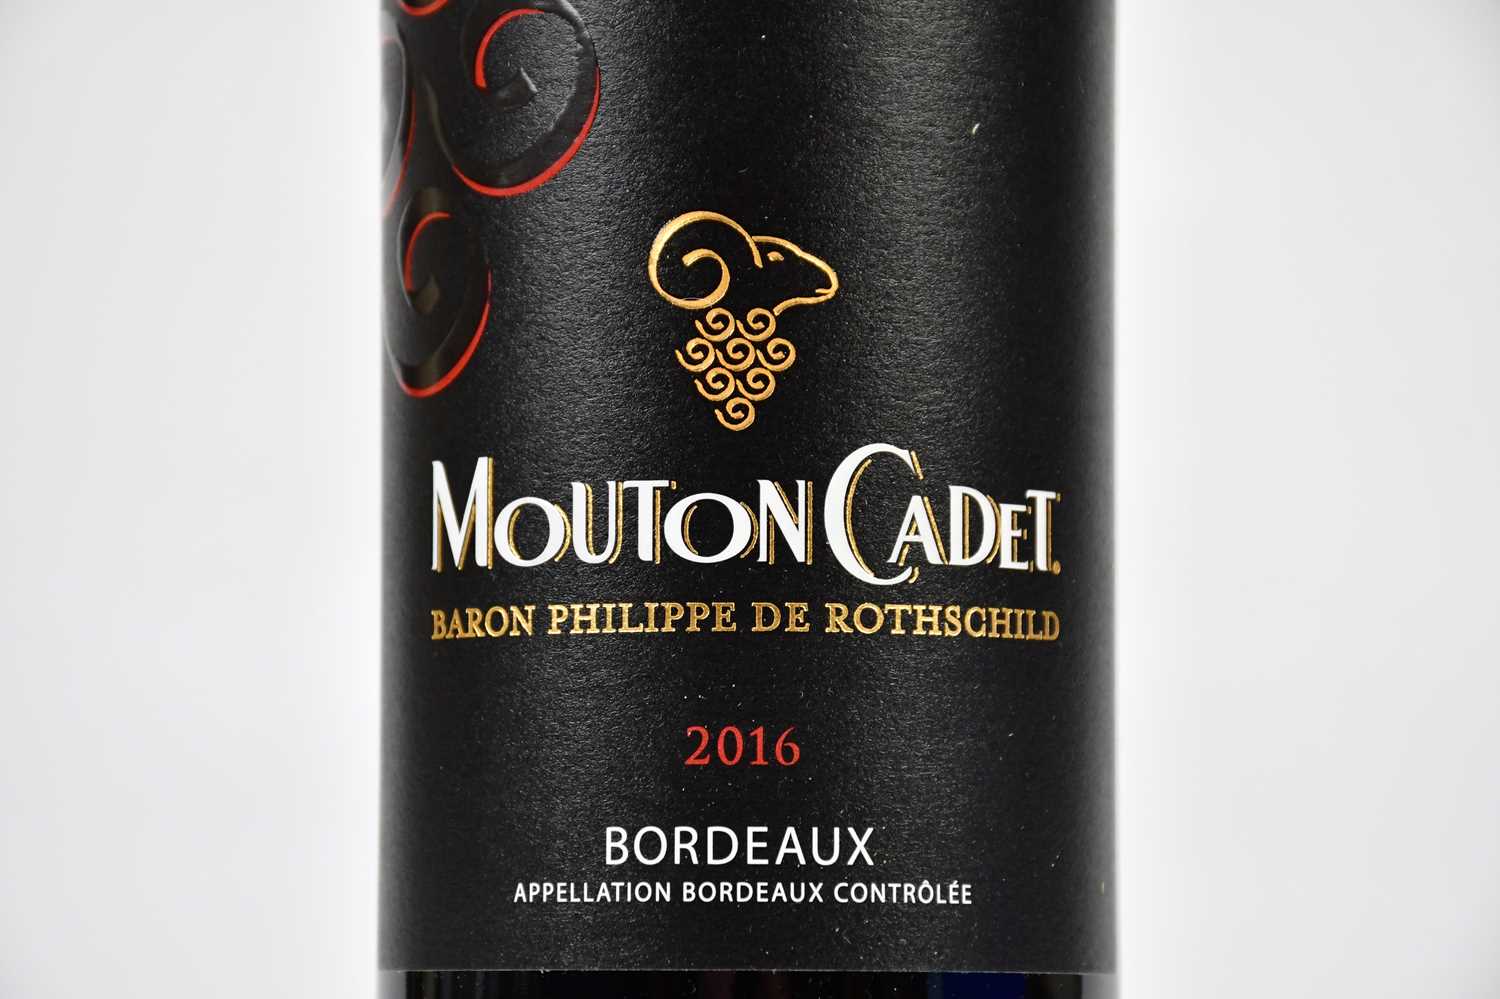 RED WINE; a bottle of Mouton Cadet Baron Philippe de Rothschild 2016, with certificate of authencity - Image 3 of 4